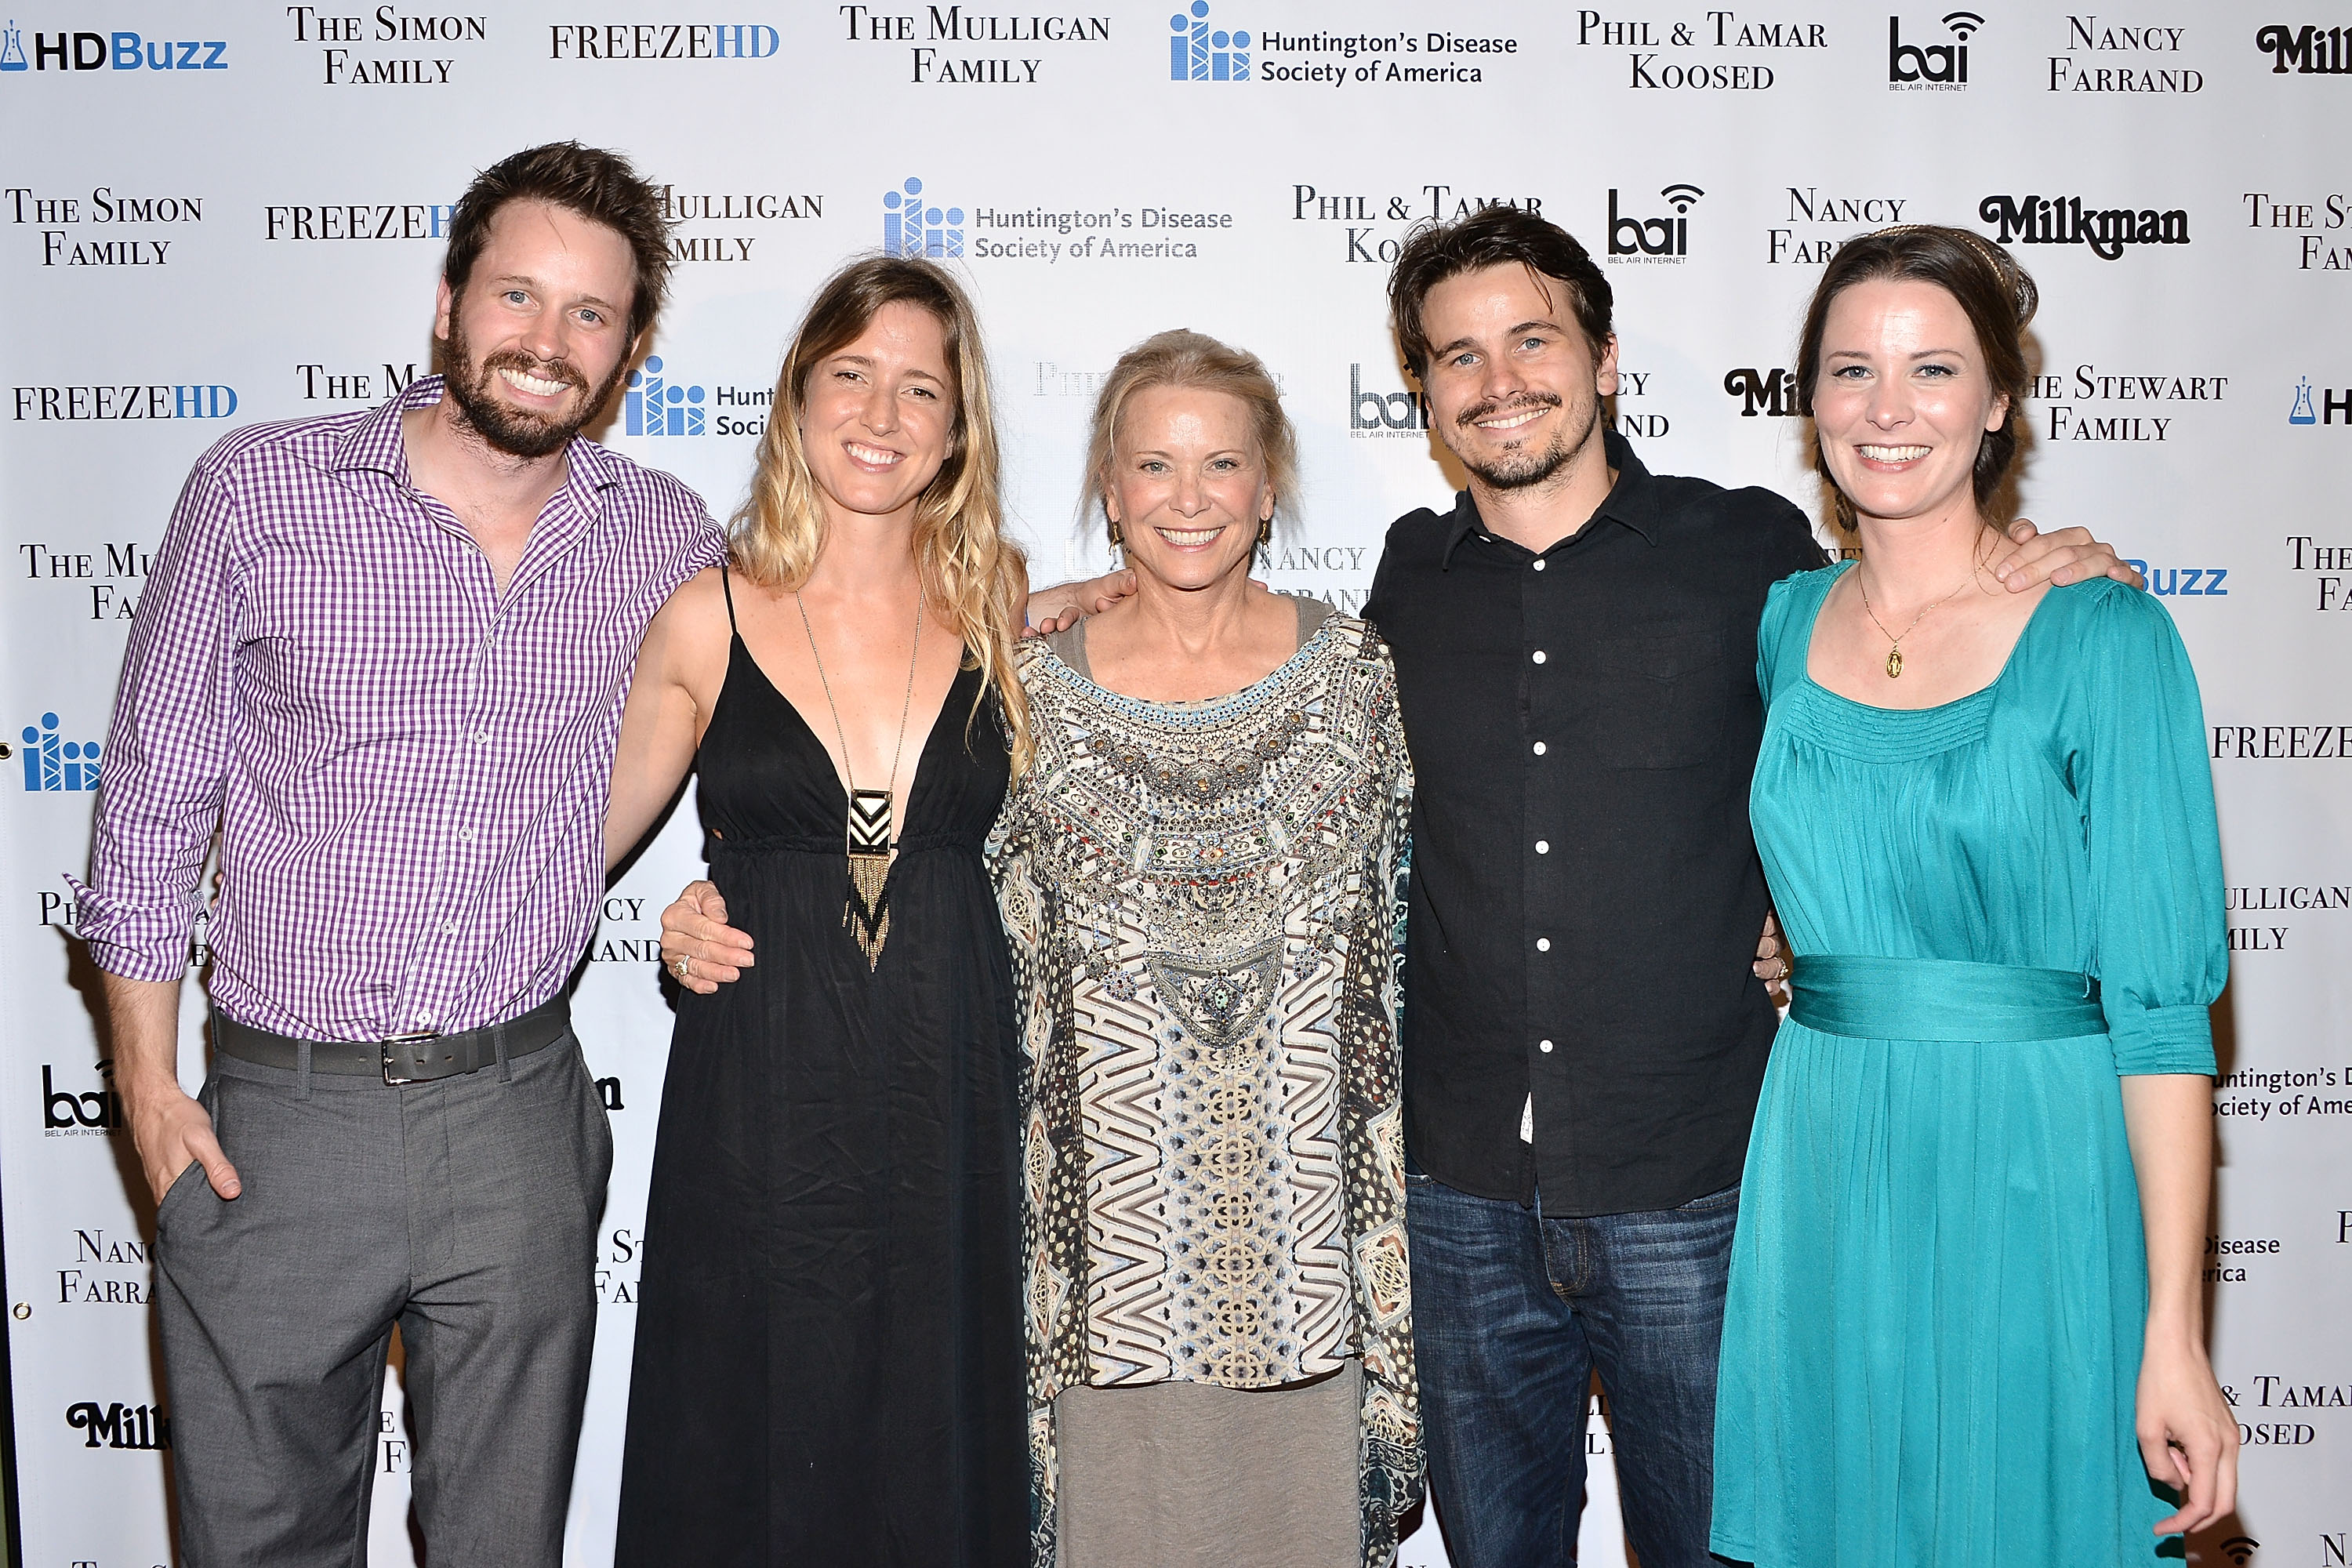 Tyler Ritter, Lelia Parma, Nancy Morgan, Jason Ritter and Carly Ritter attend the 2nd Annual Freeze HD fundraiser at Bootleg Theater on September 24, 2016 in Los Angeles, California. | Source: Getty Images